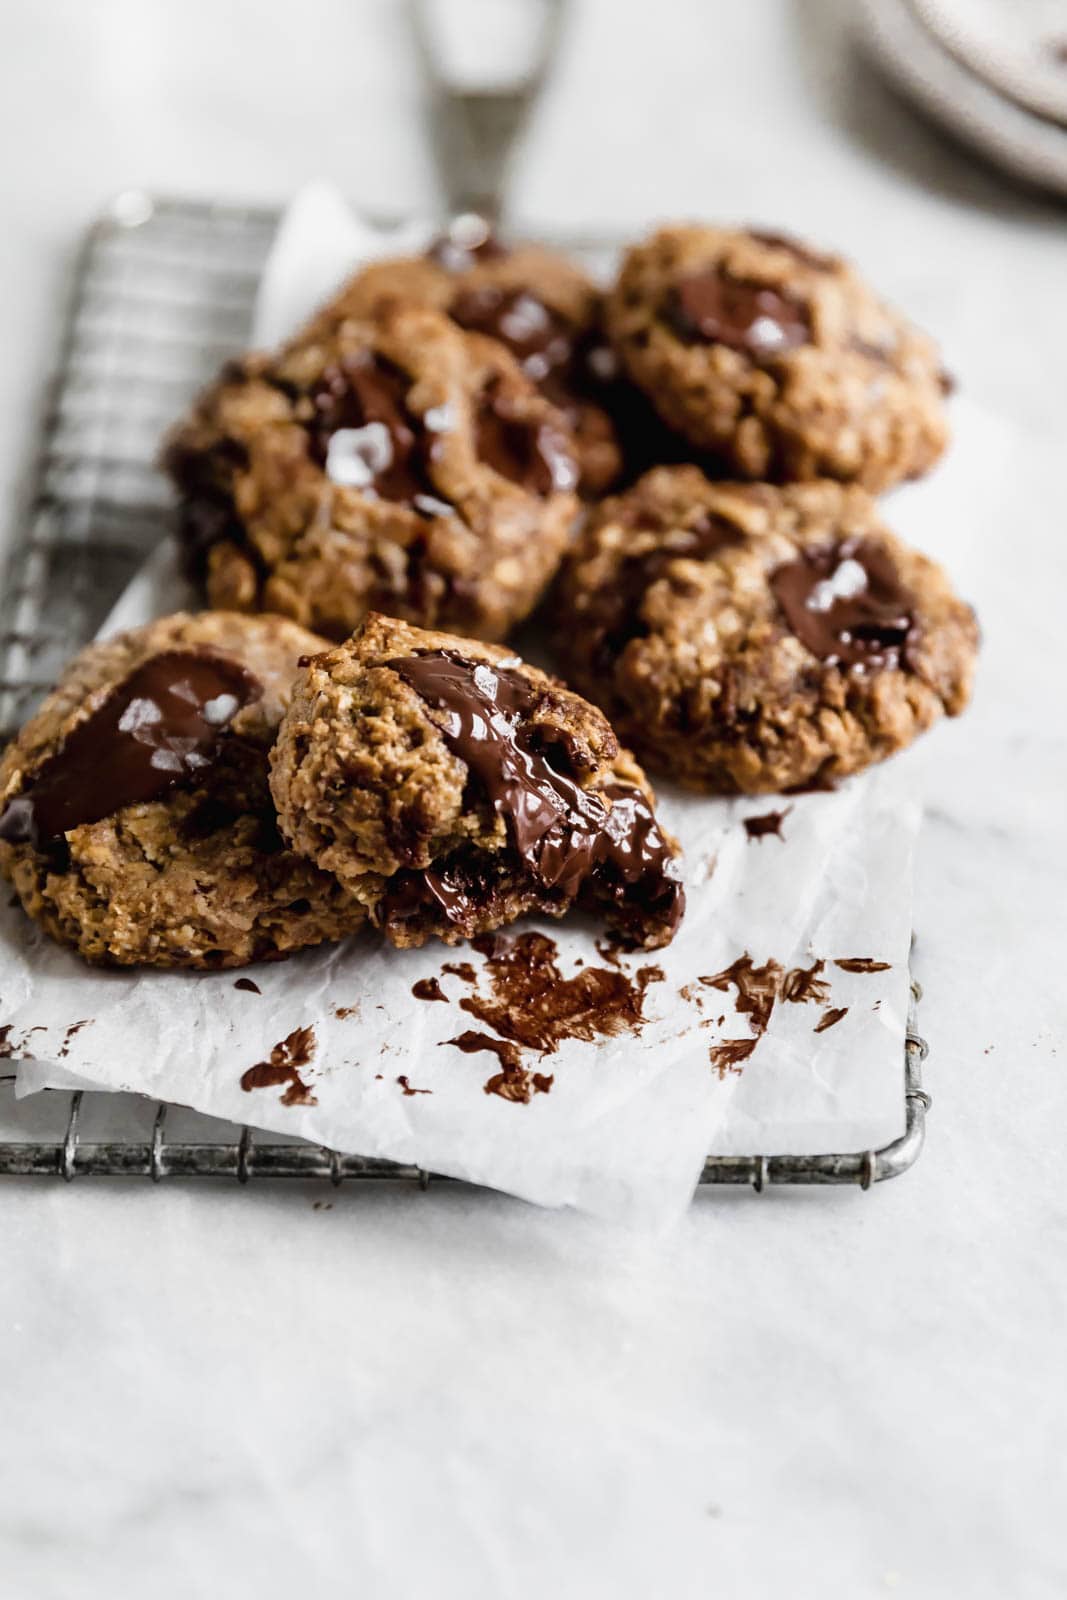 Yes these Tahini Oatmeal Chocolate Chunk Cookies are vegan, gluten free, and refined sugar free, but they sure as heck don't taste like health food. DROOL.